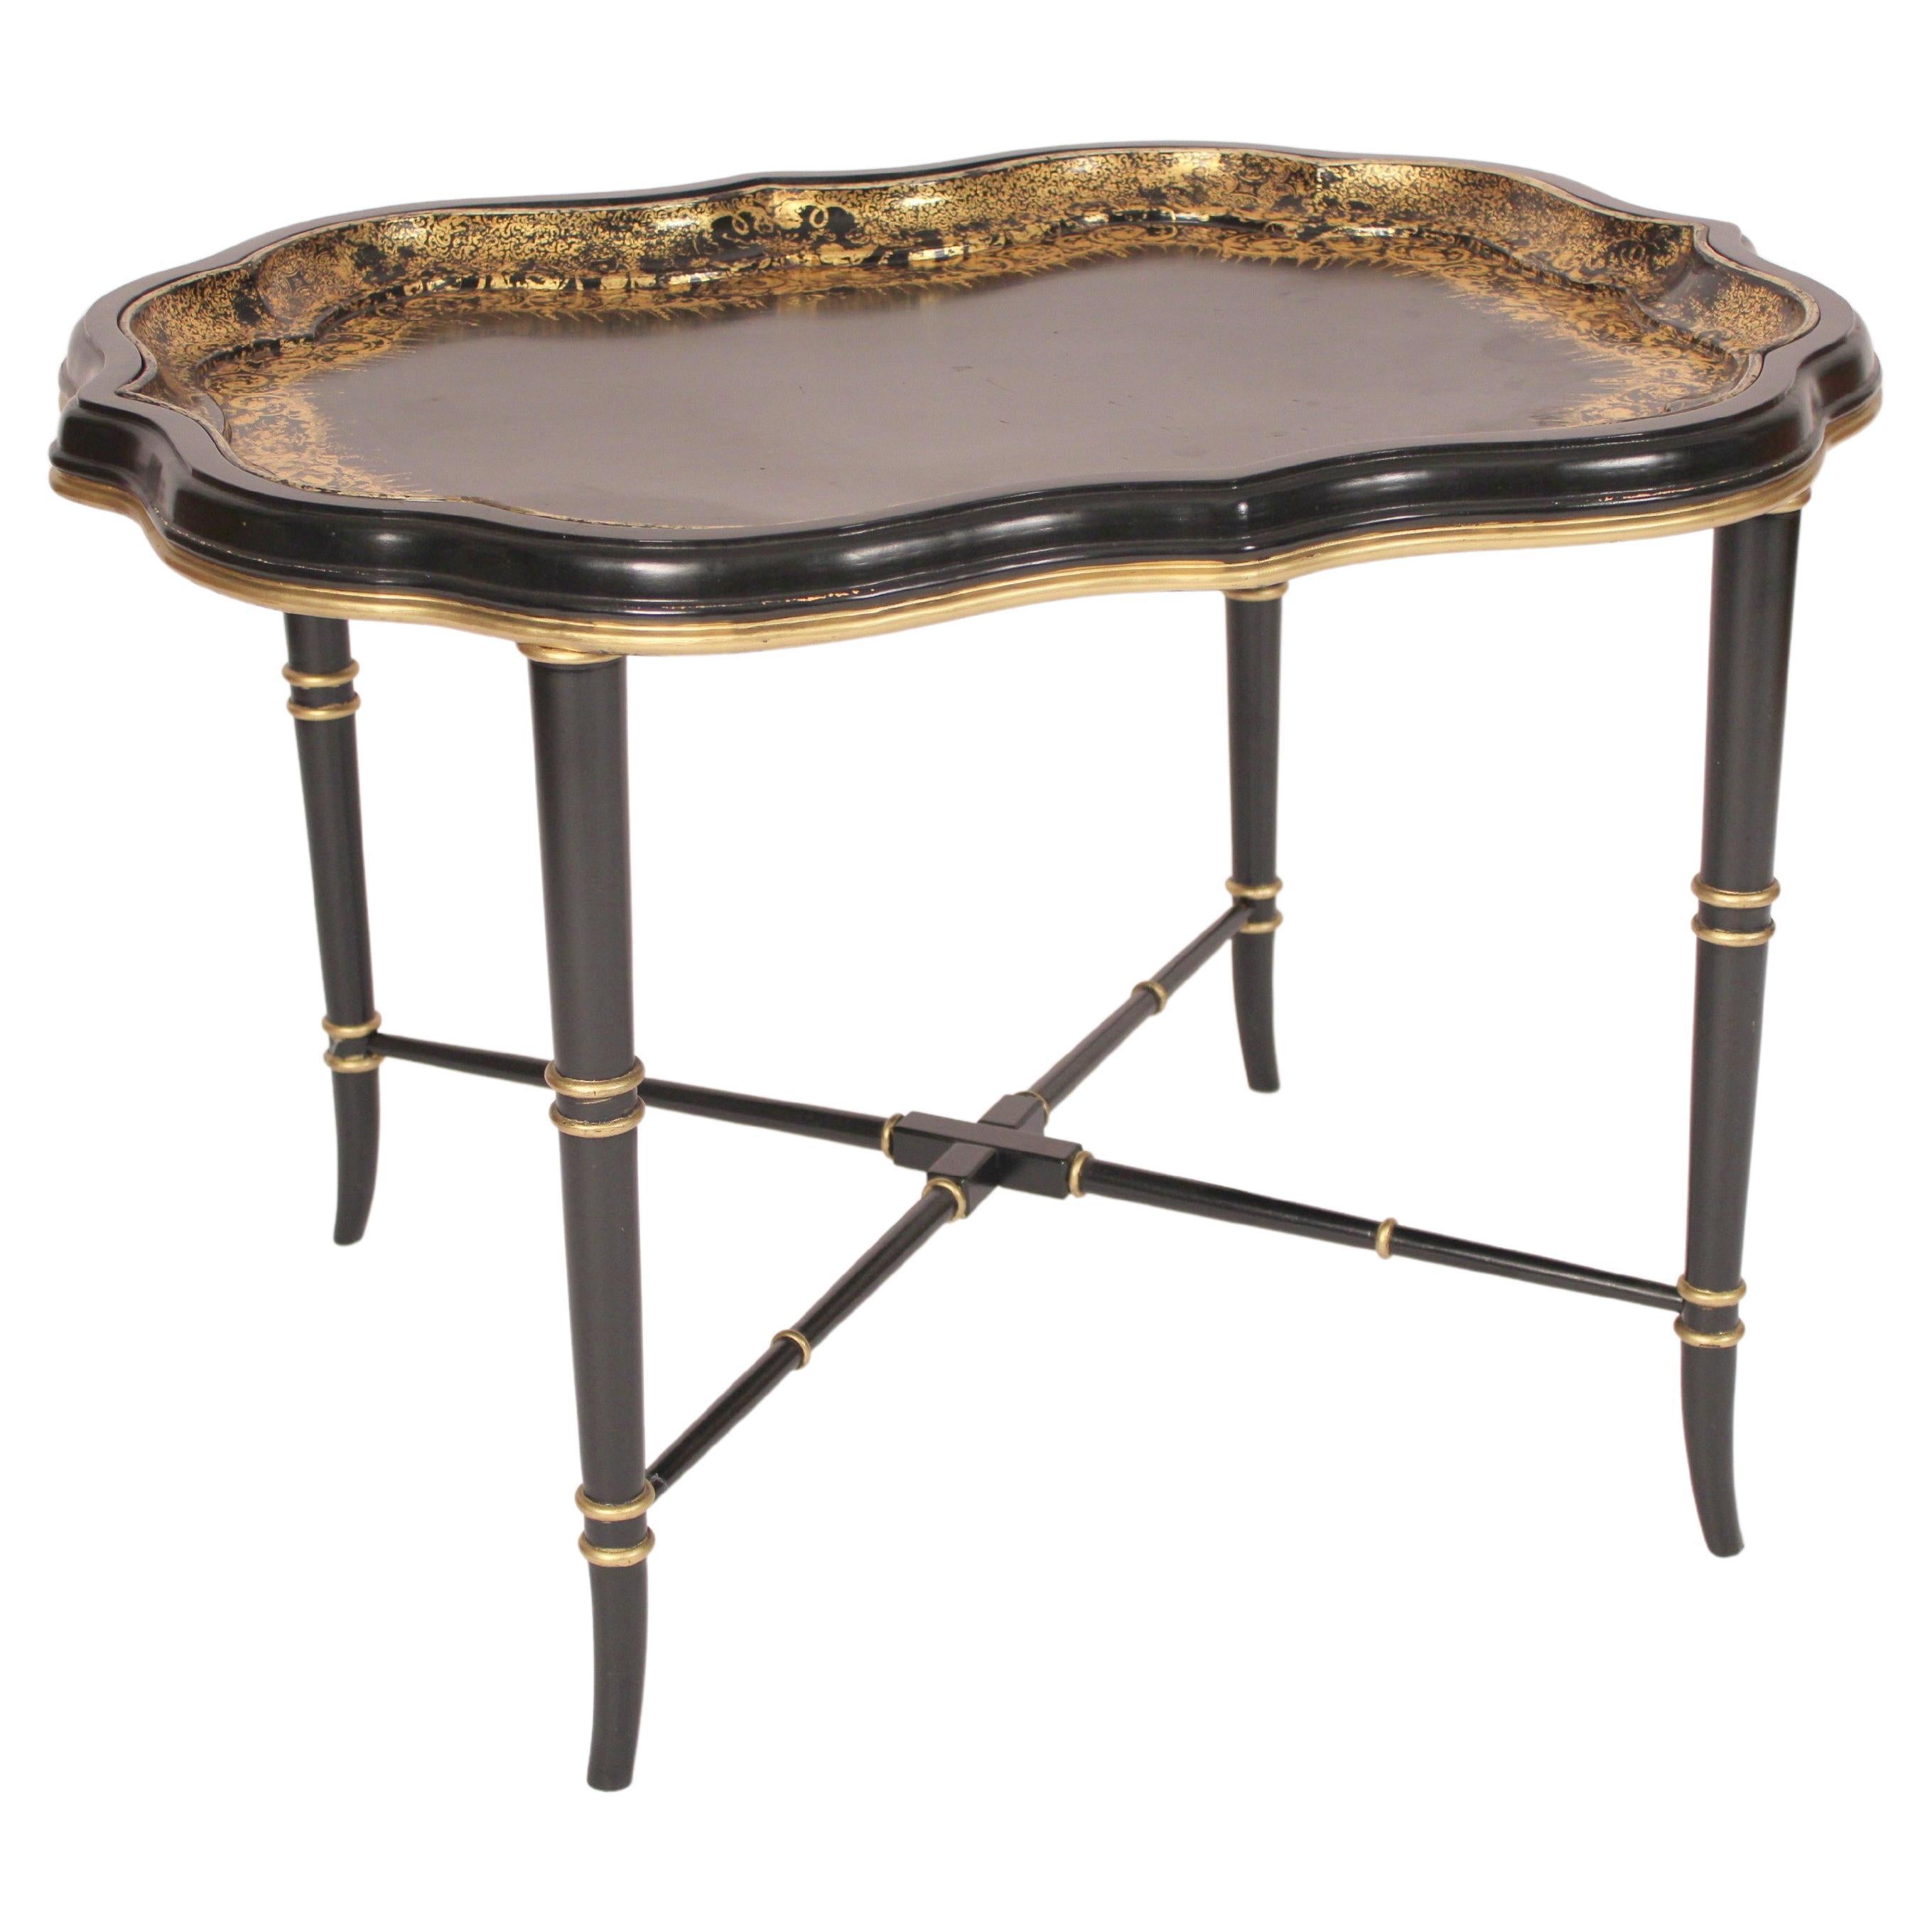 English Regency Style Paper Mache Tray Table